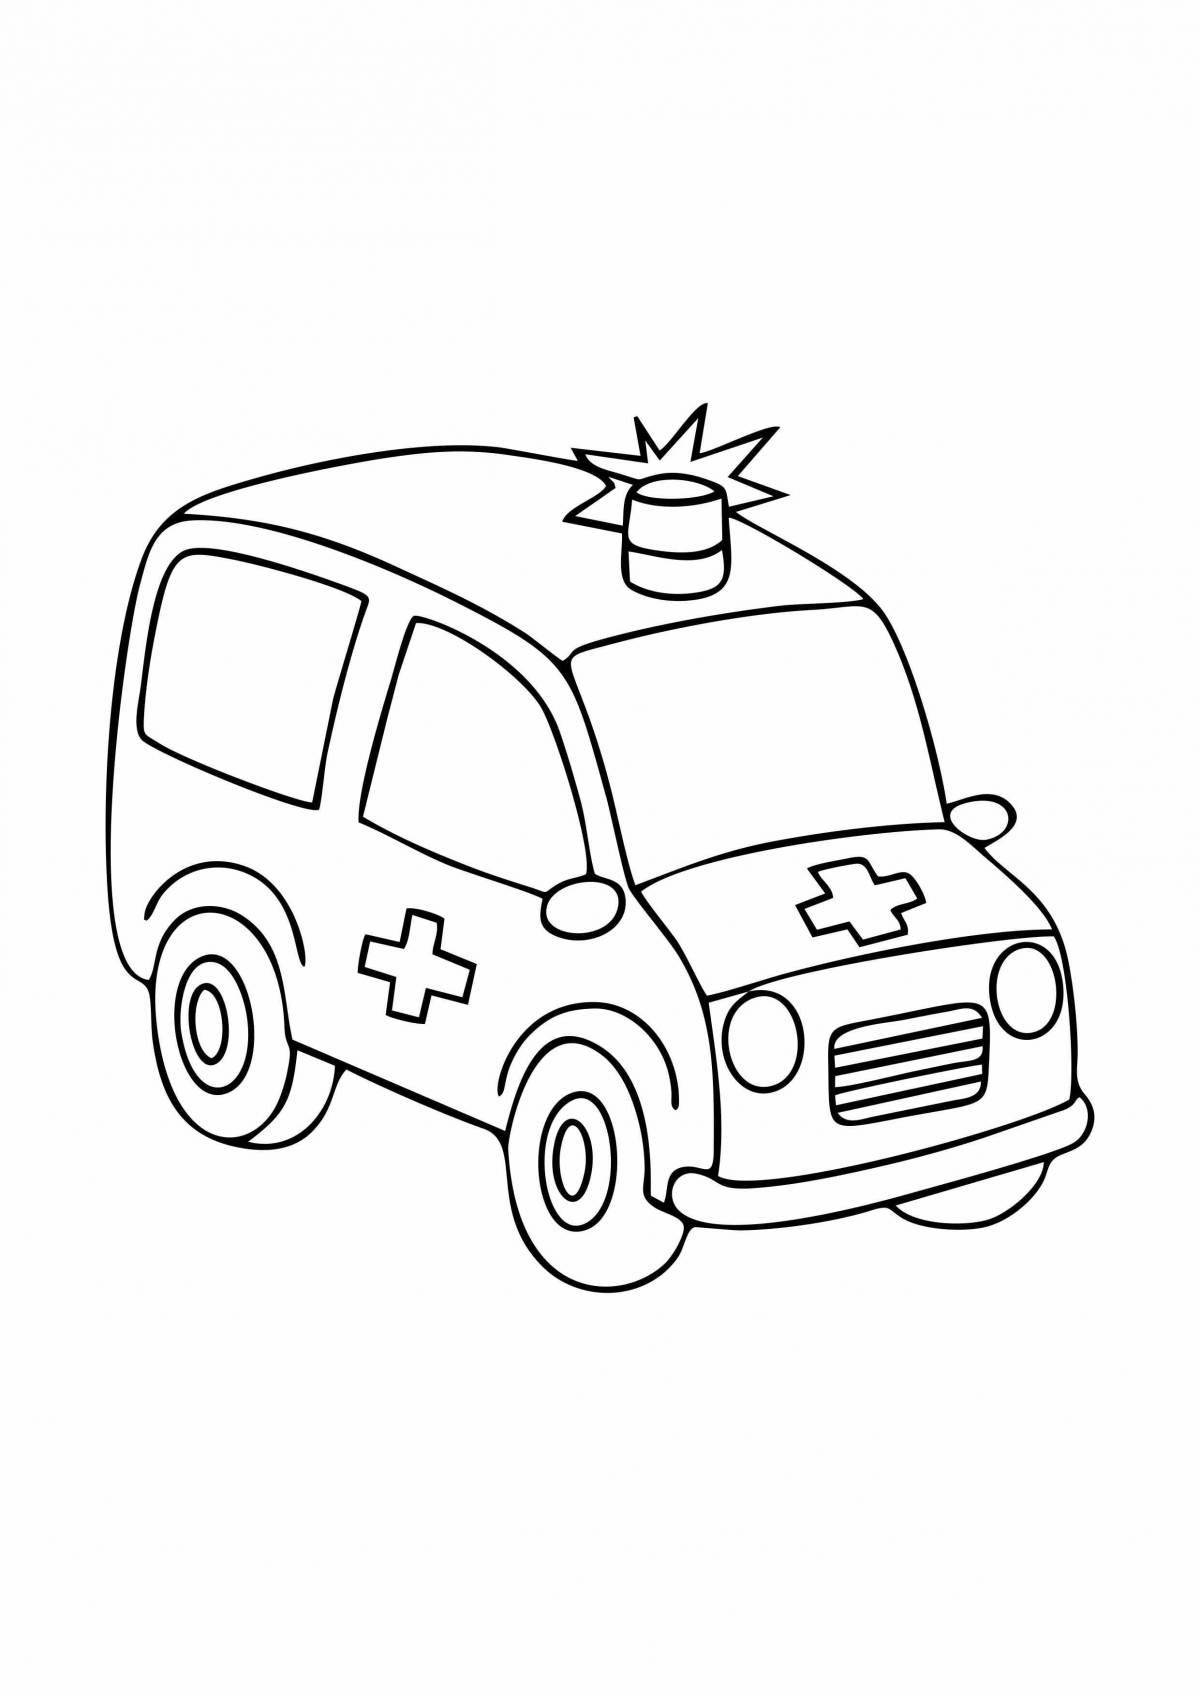 Creative first aid coloring book for kids